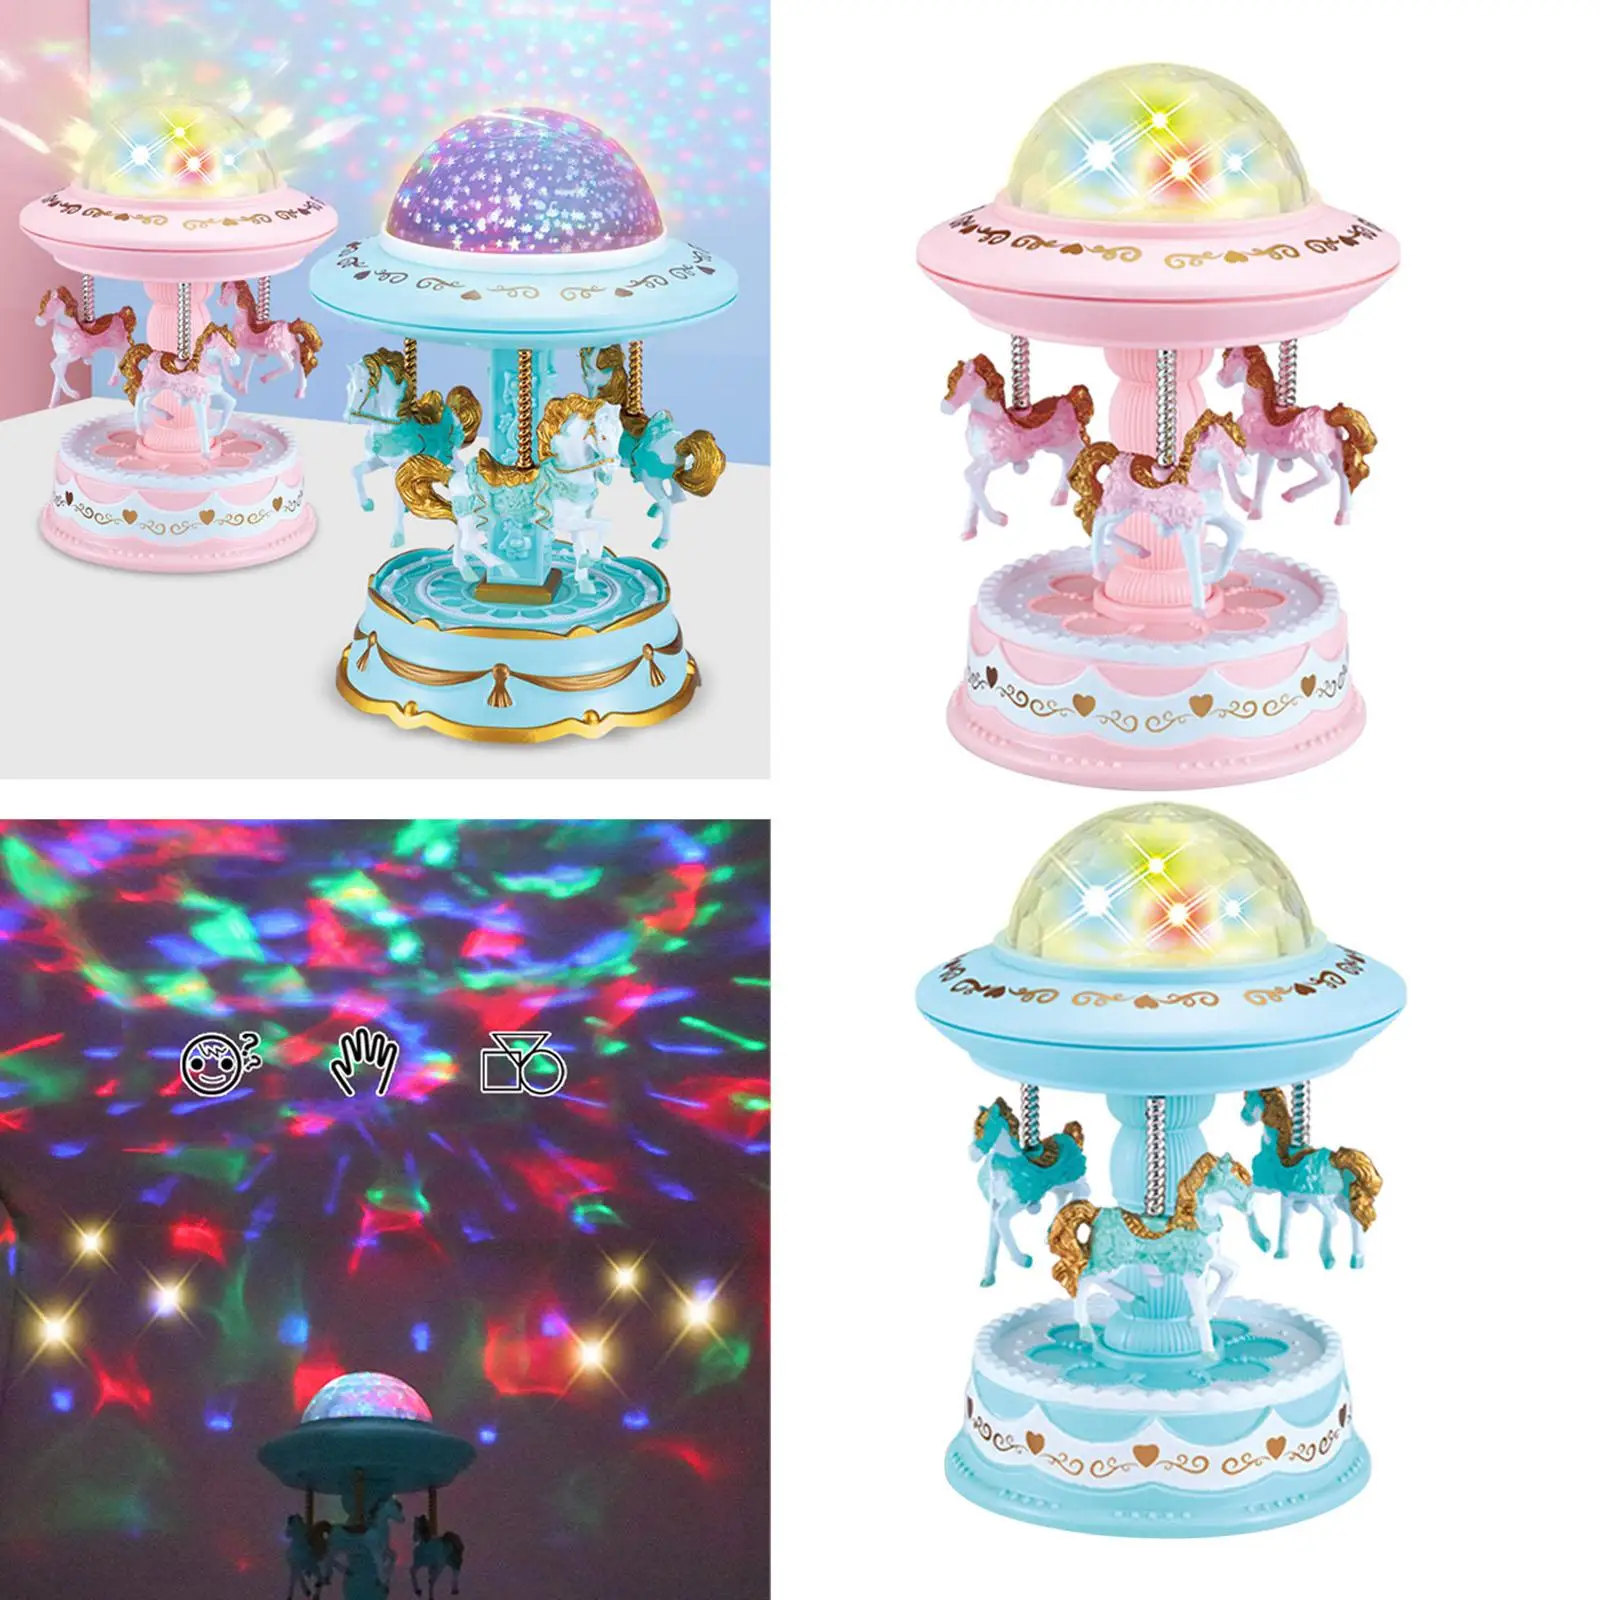 Cute Music Box Projector Night Light Rotatable Horse Carousel Style for Bedroom Anniversary Desktop Valentine Day Ornament